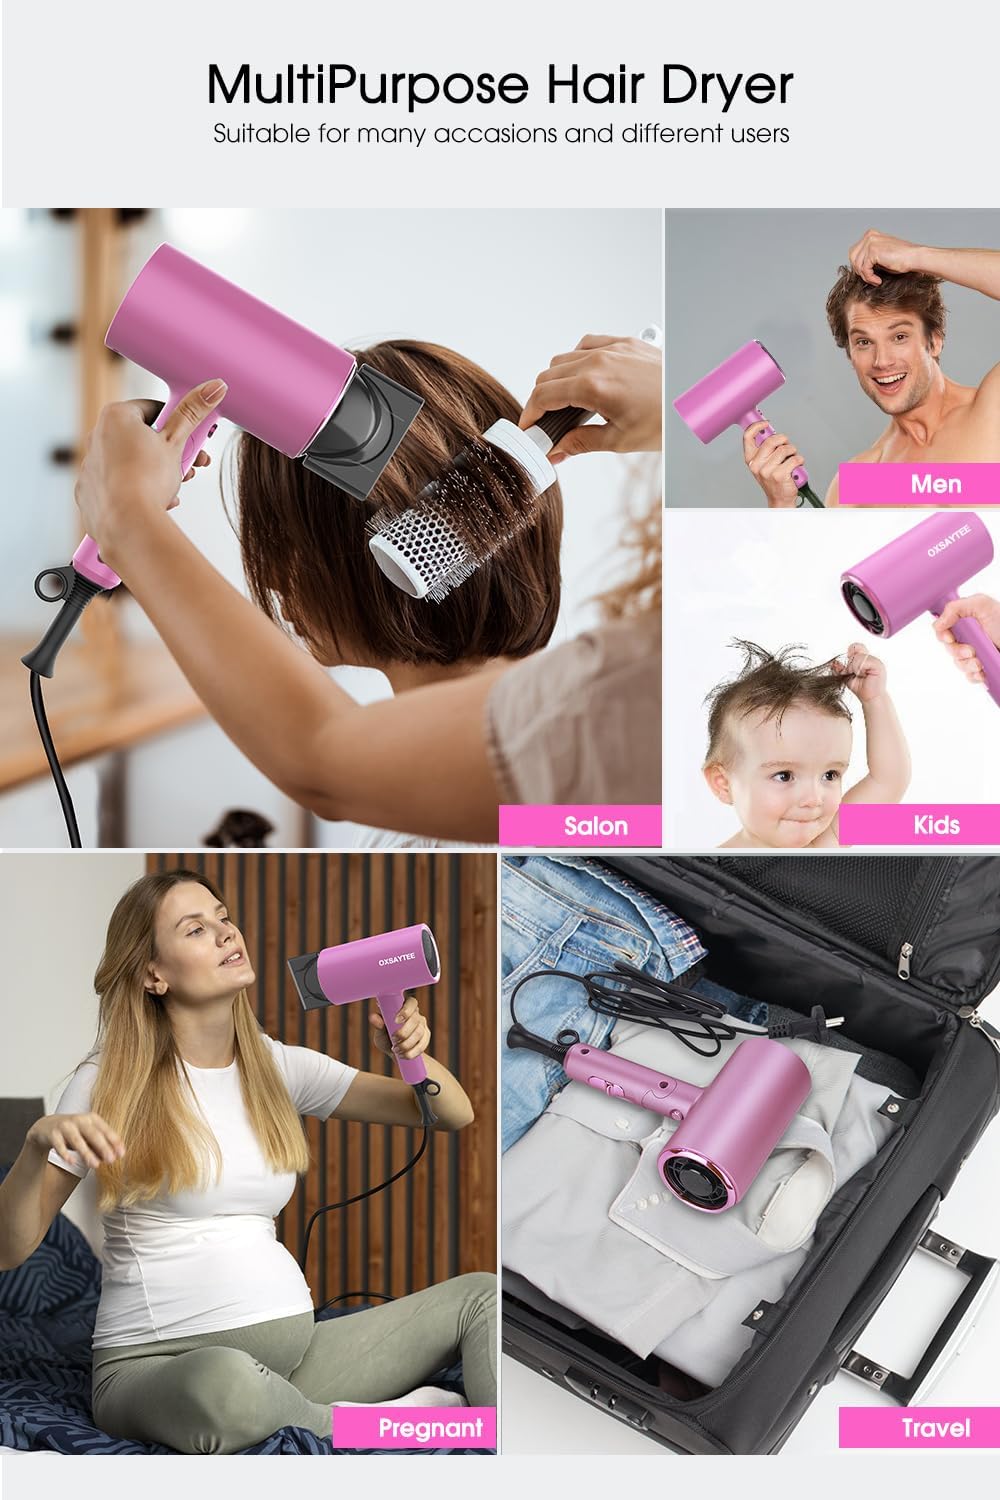 Oxsaytee hair dryer 2200W Professional Salon Hair Blow Dryer with Diffuser Low Noise Lightweight 3 Heating 2 Speed Cold Settings Blow Hairdryer for Home Travel